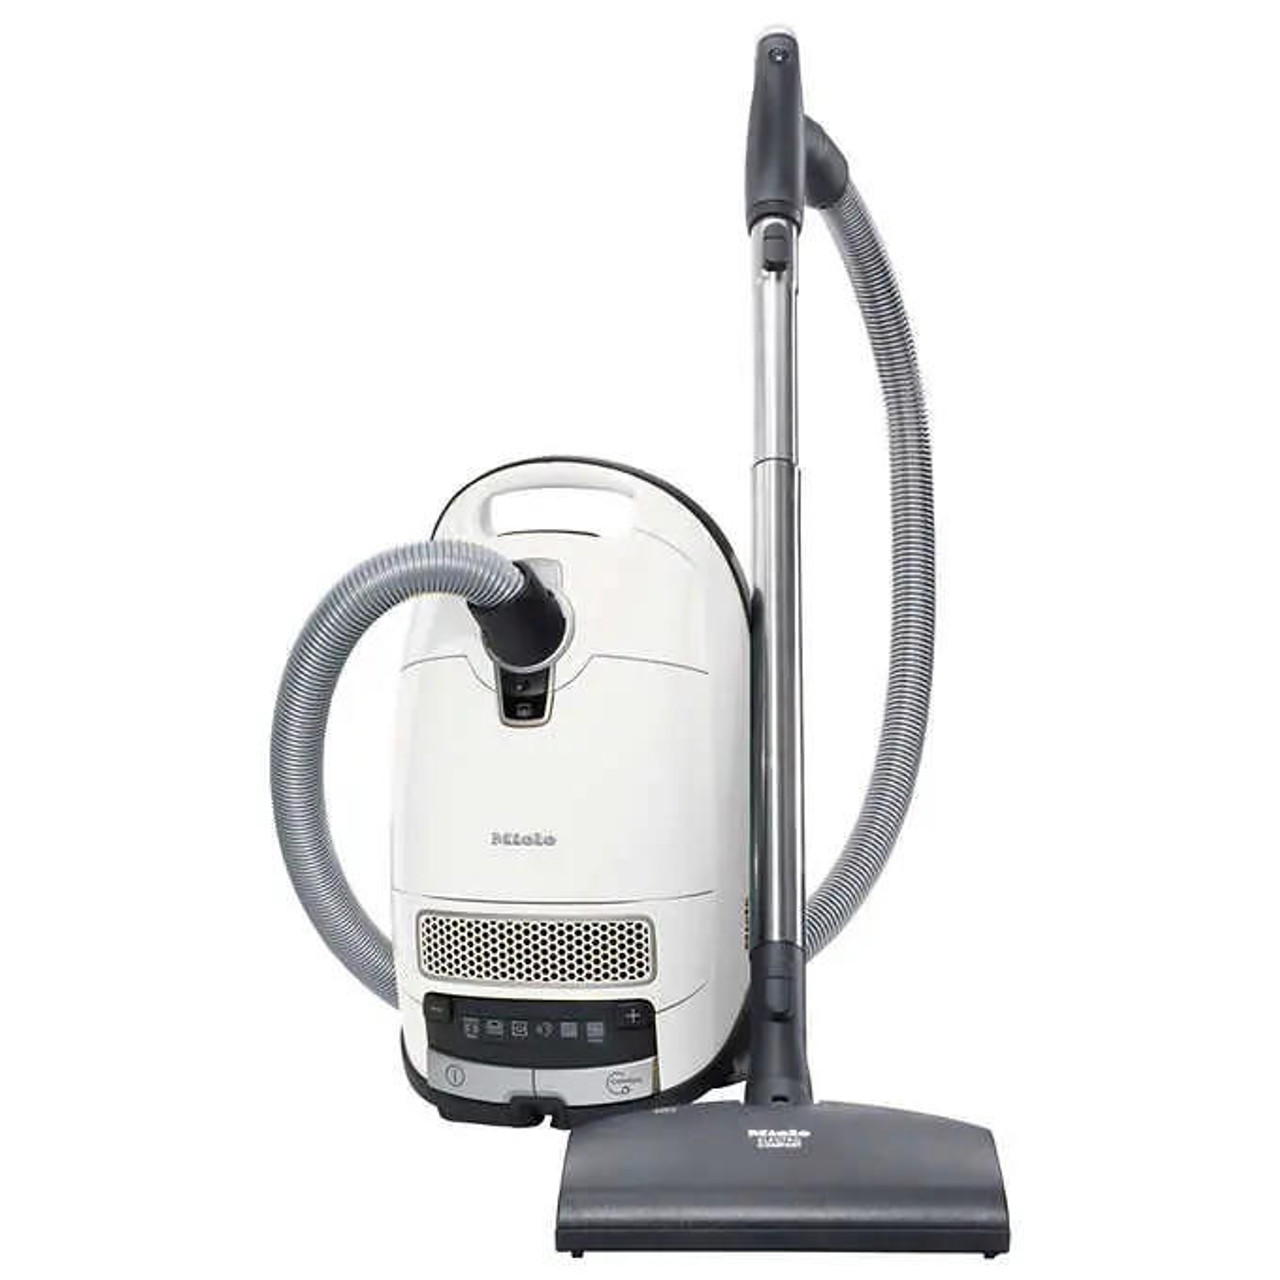 Miele Complete C3 Excellence Canister Vacuum - Includes Electrobrush, Universal Brush, and Exceptional Filtration
-Chicken Pieces